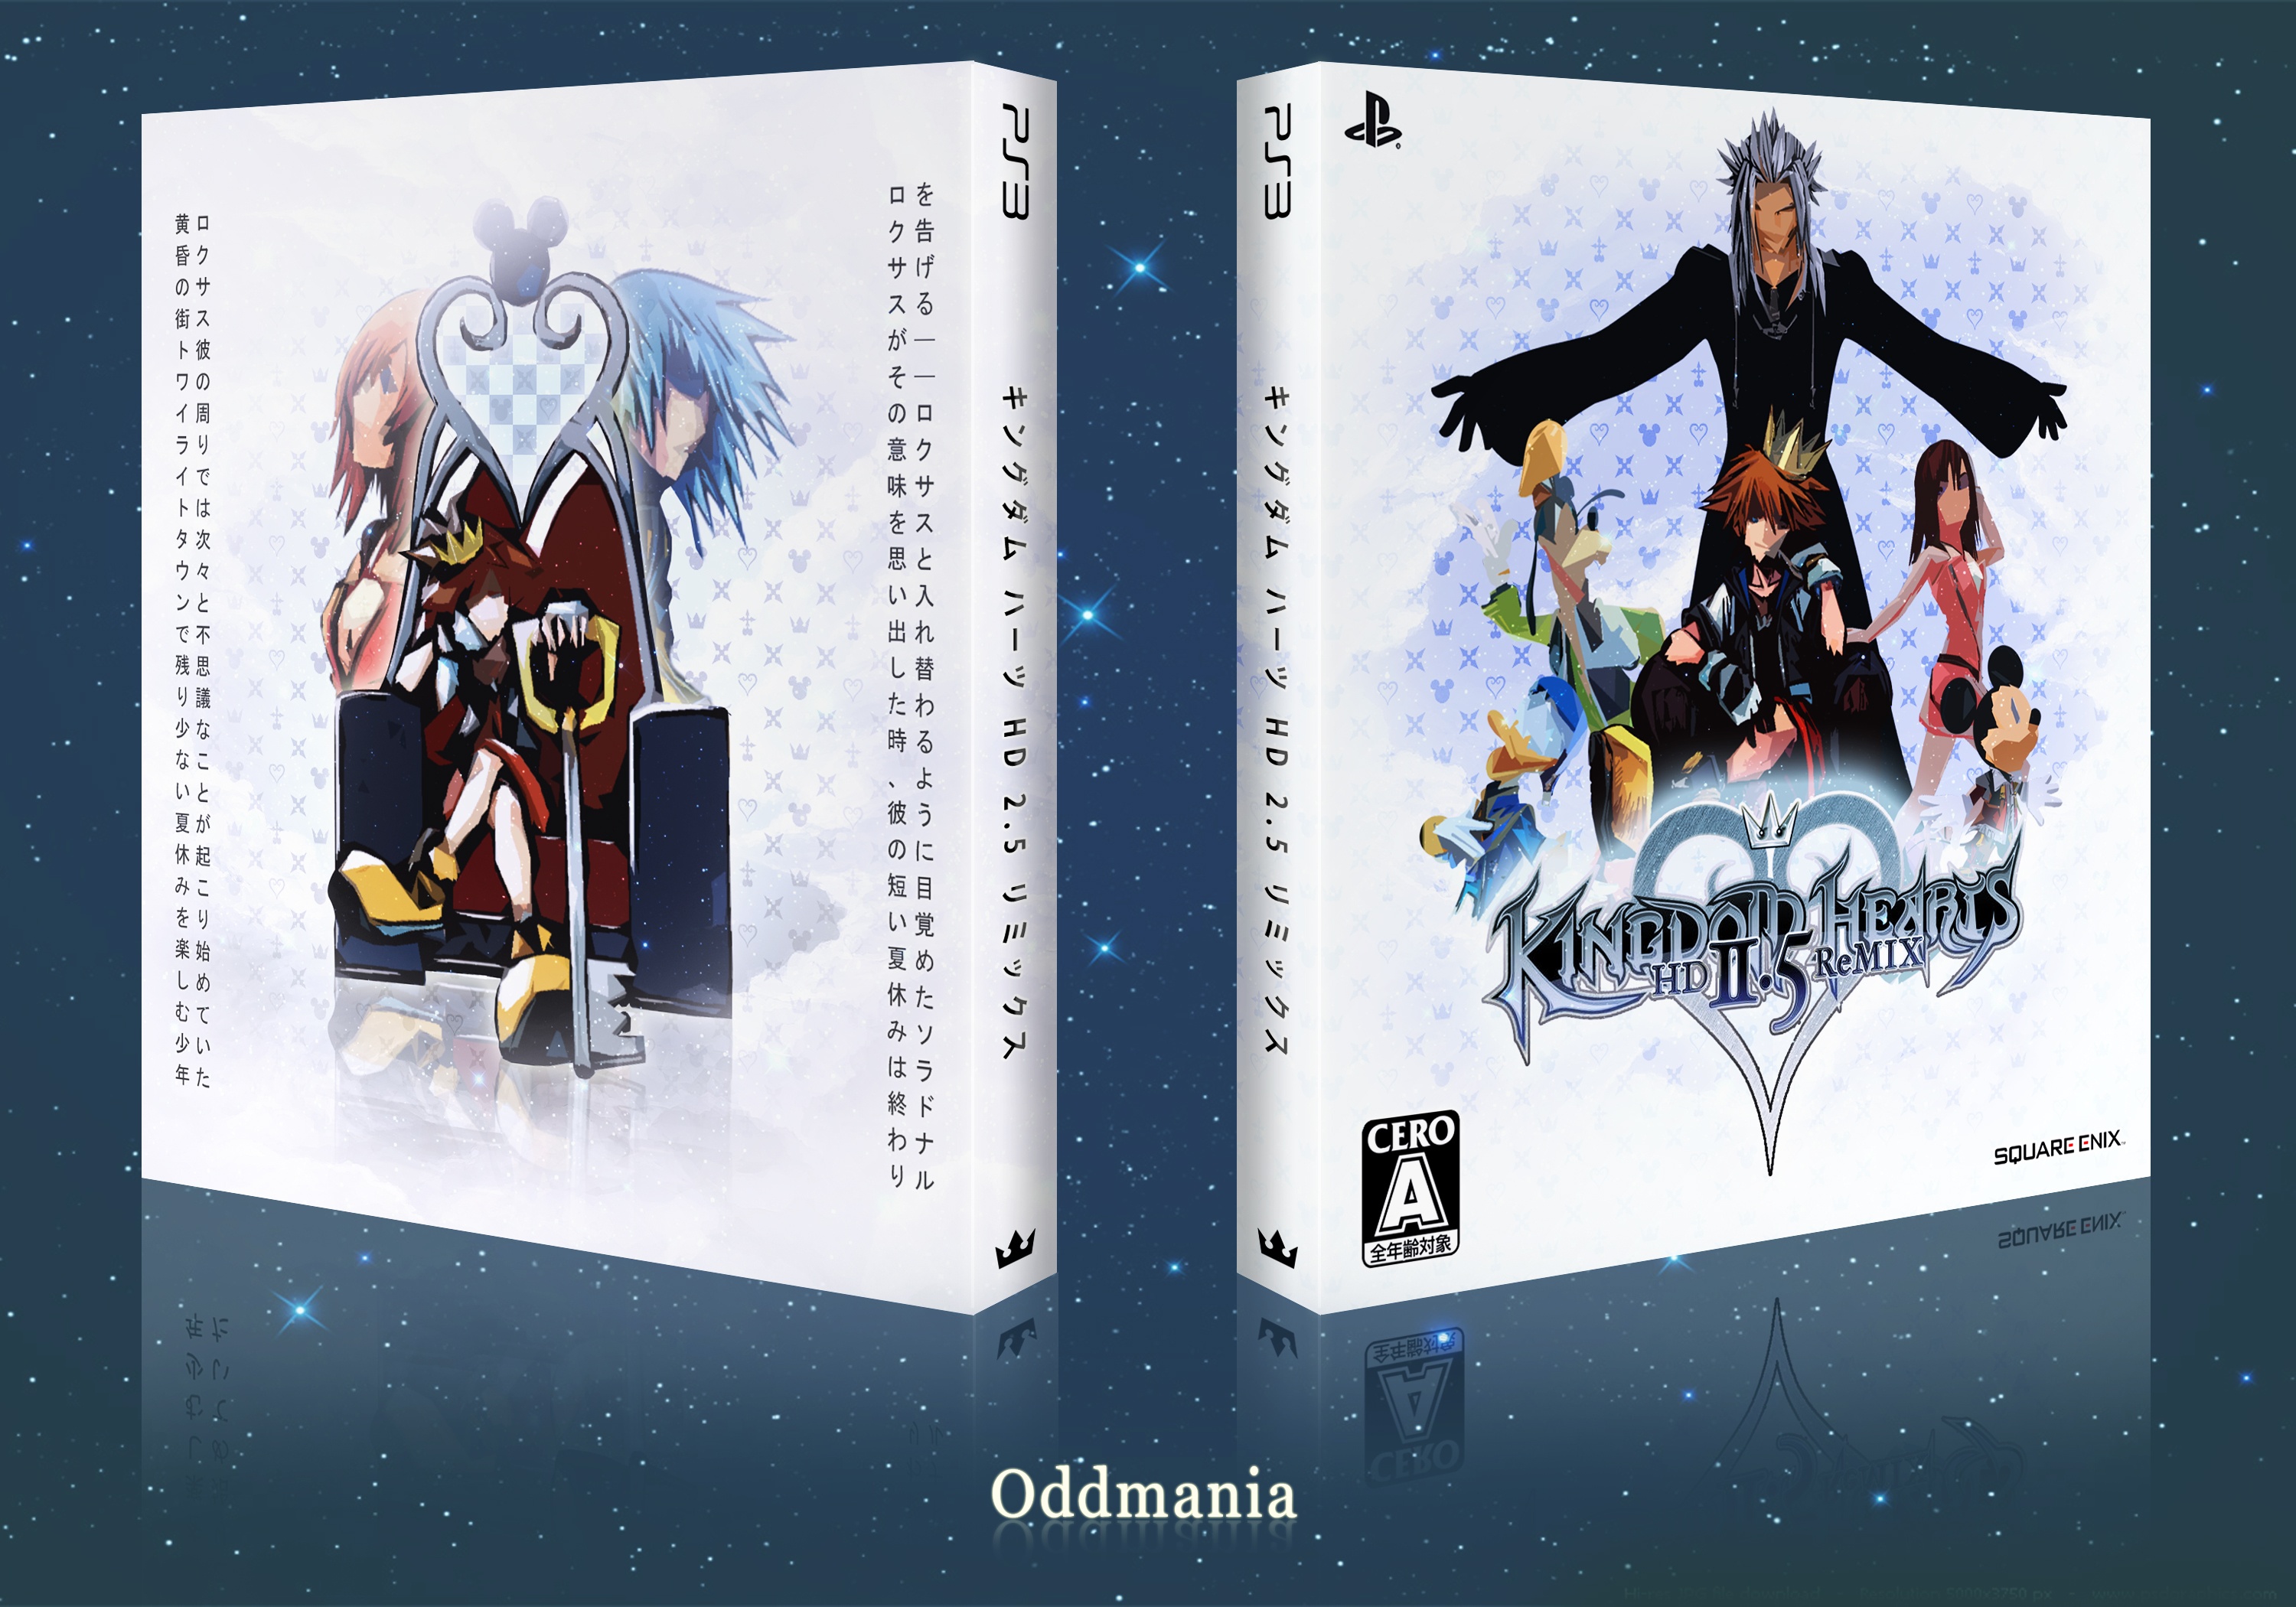 download kingdom hearts hd 1.5 remix for free